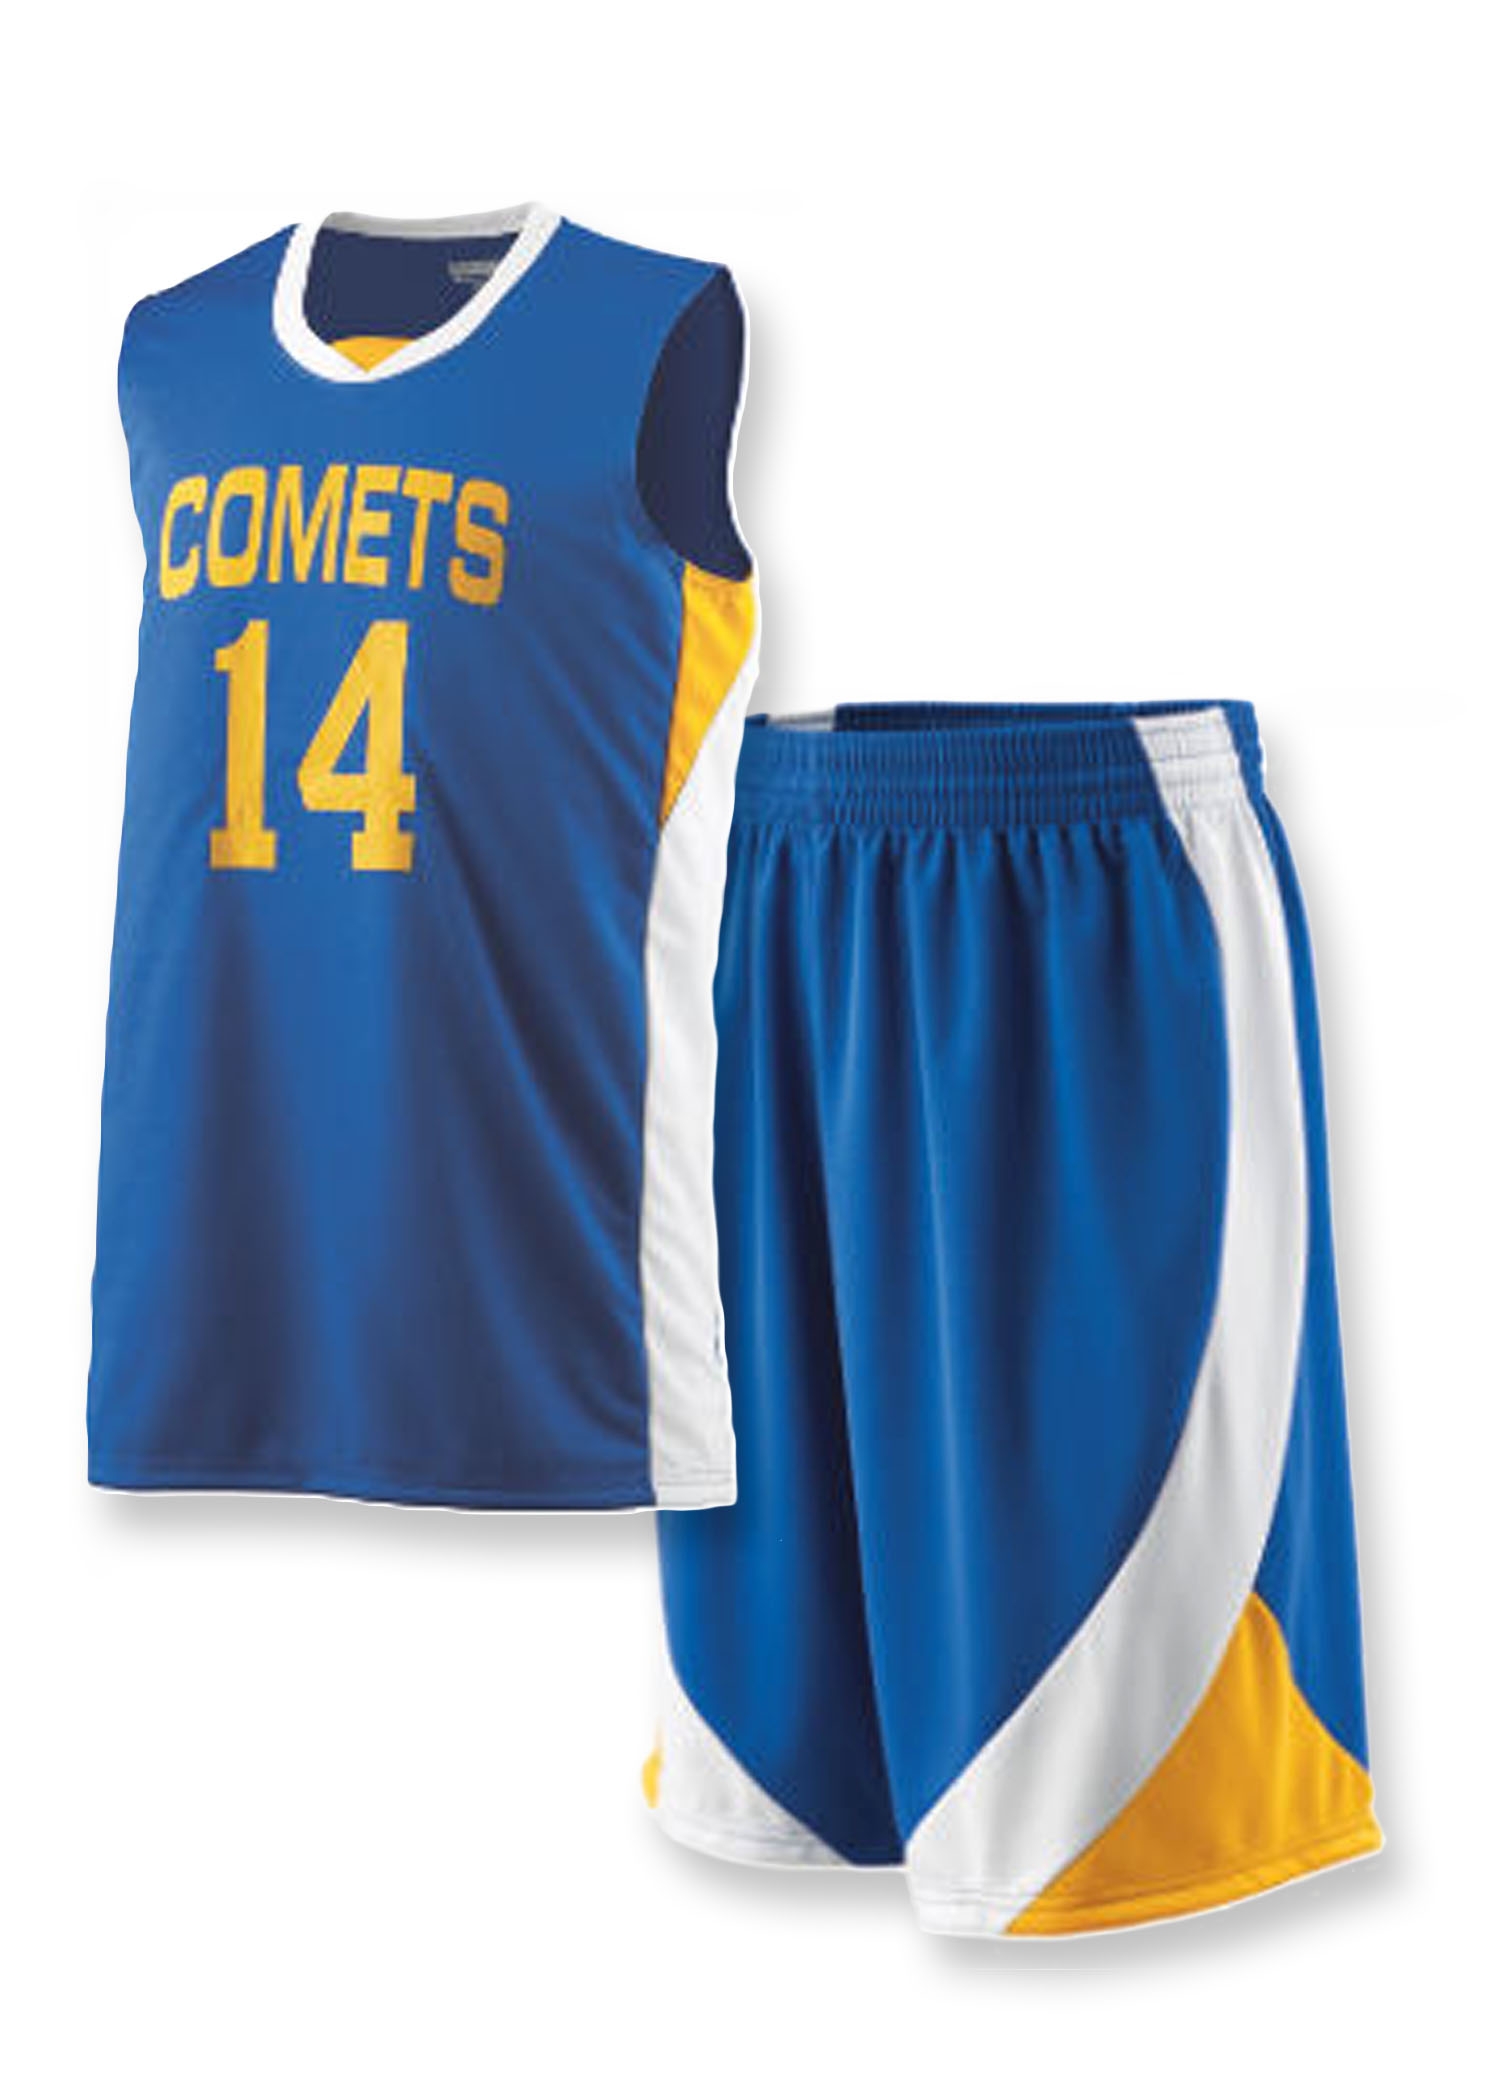 Adult Team Basketball Uniform Package with Graphics